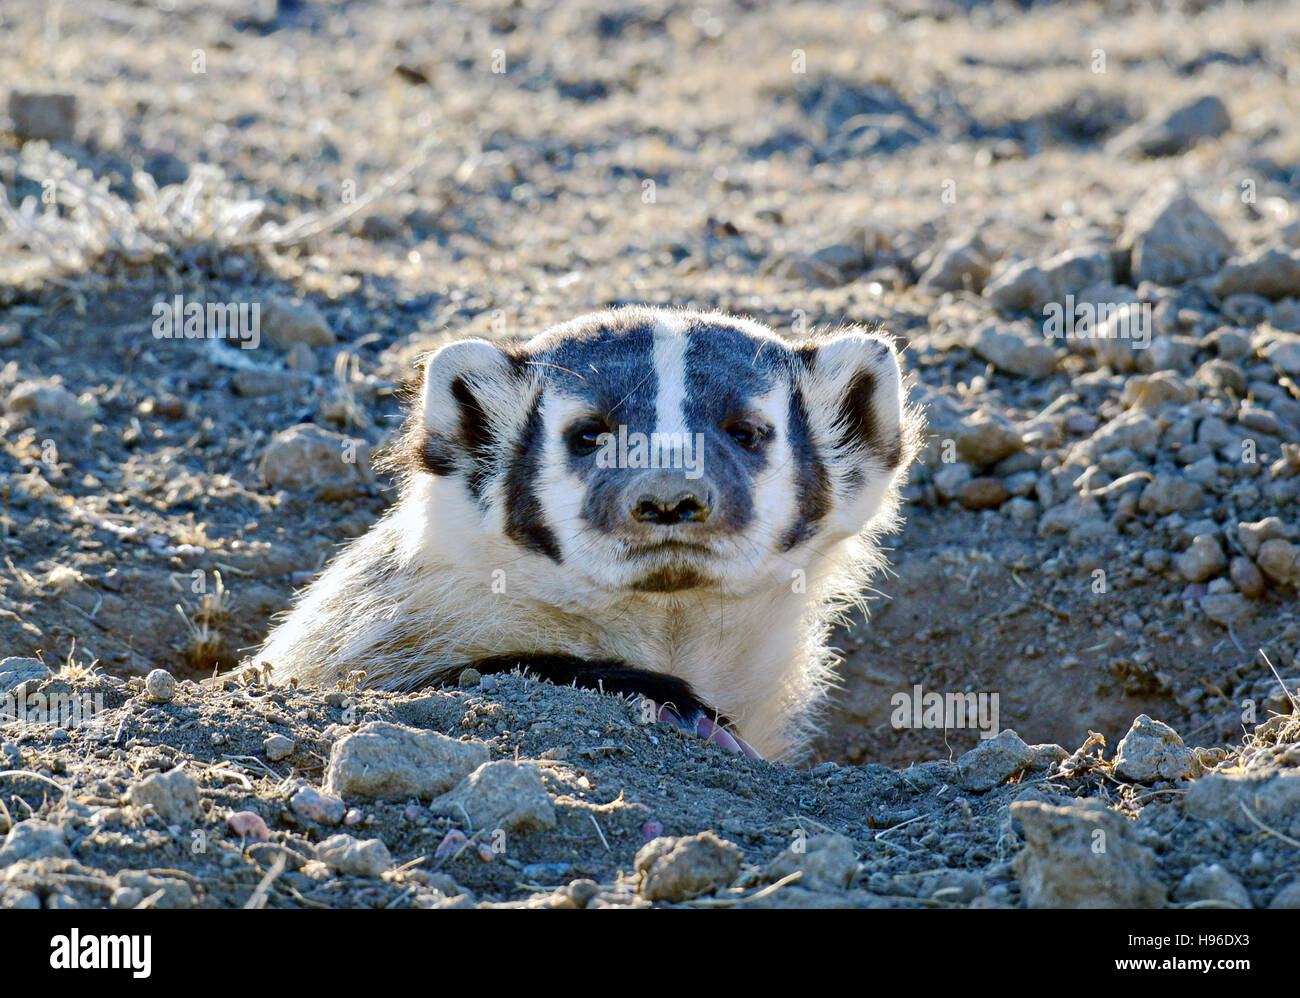 An American badger burrows in the dirt November 6, 2016 in the Great Plains. Stock Photo